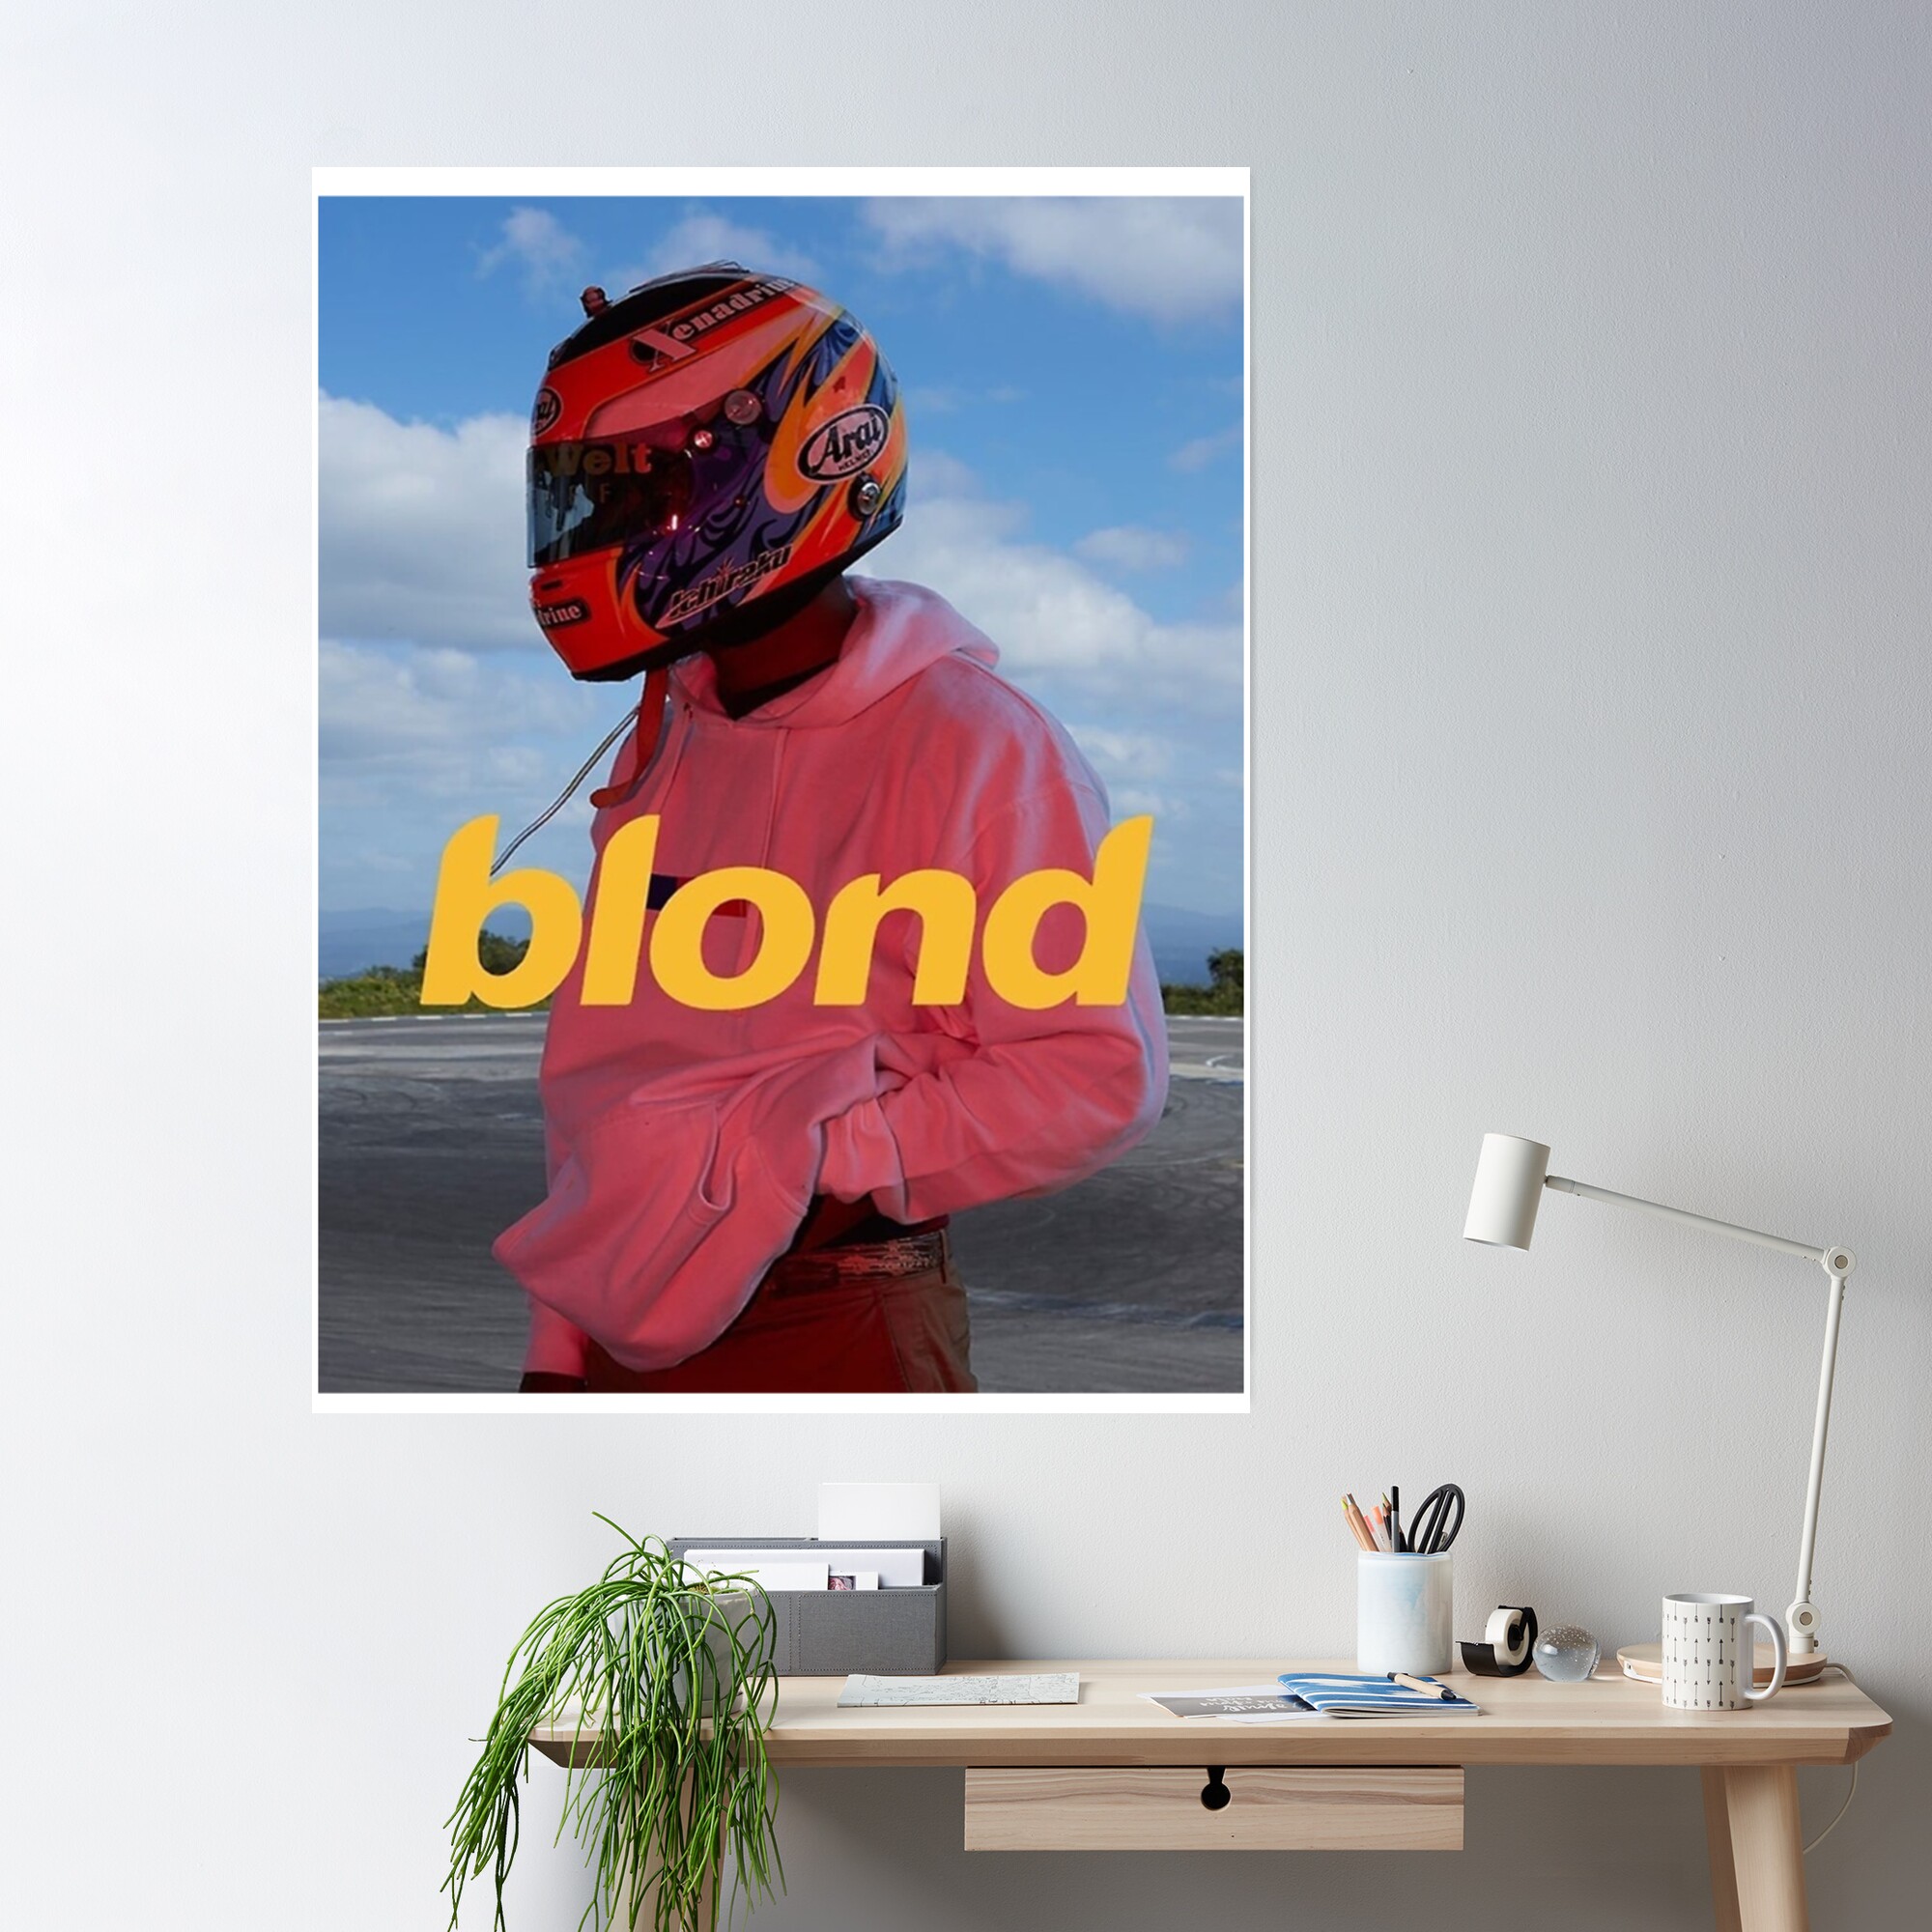 cposterlargesquare product2000x2000 11 - Frank Ocean Merch